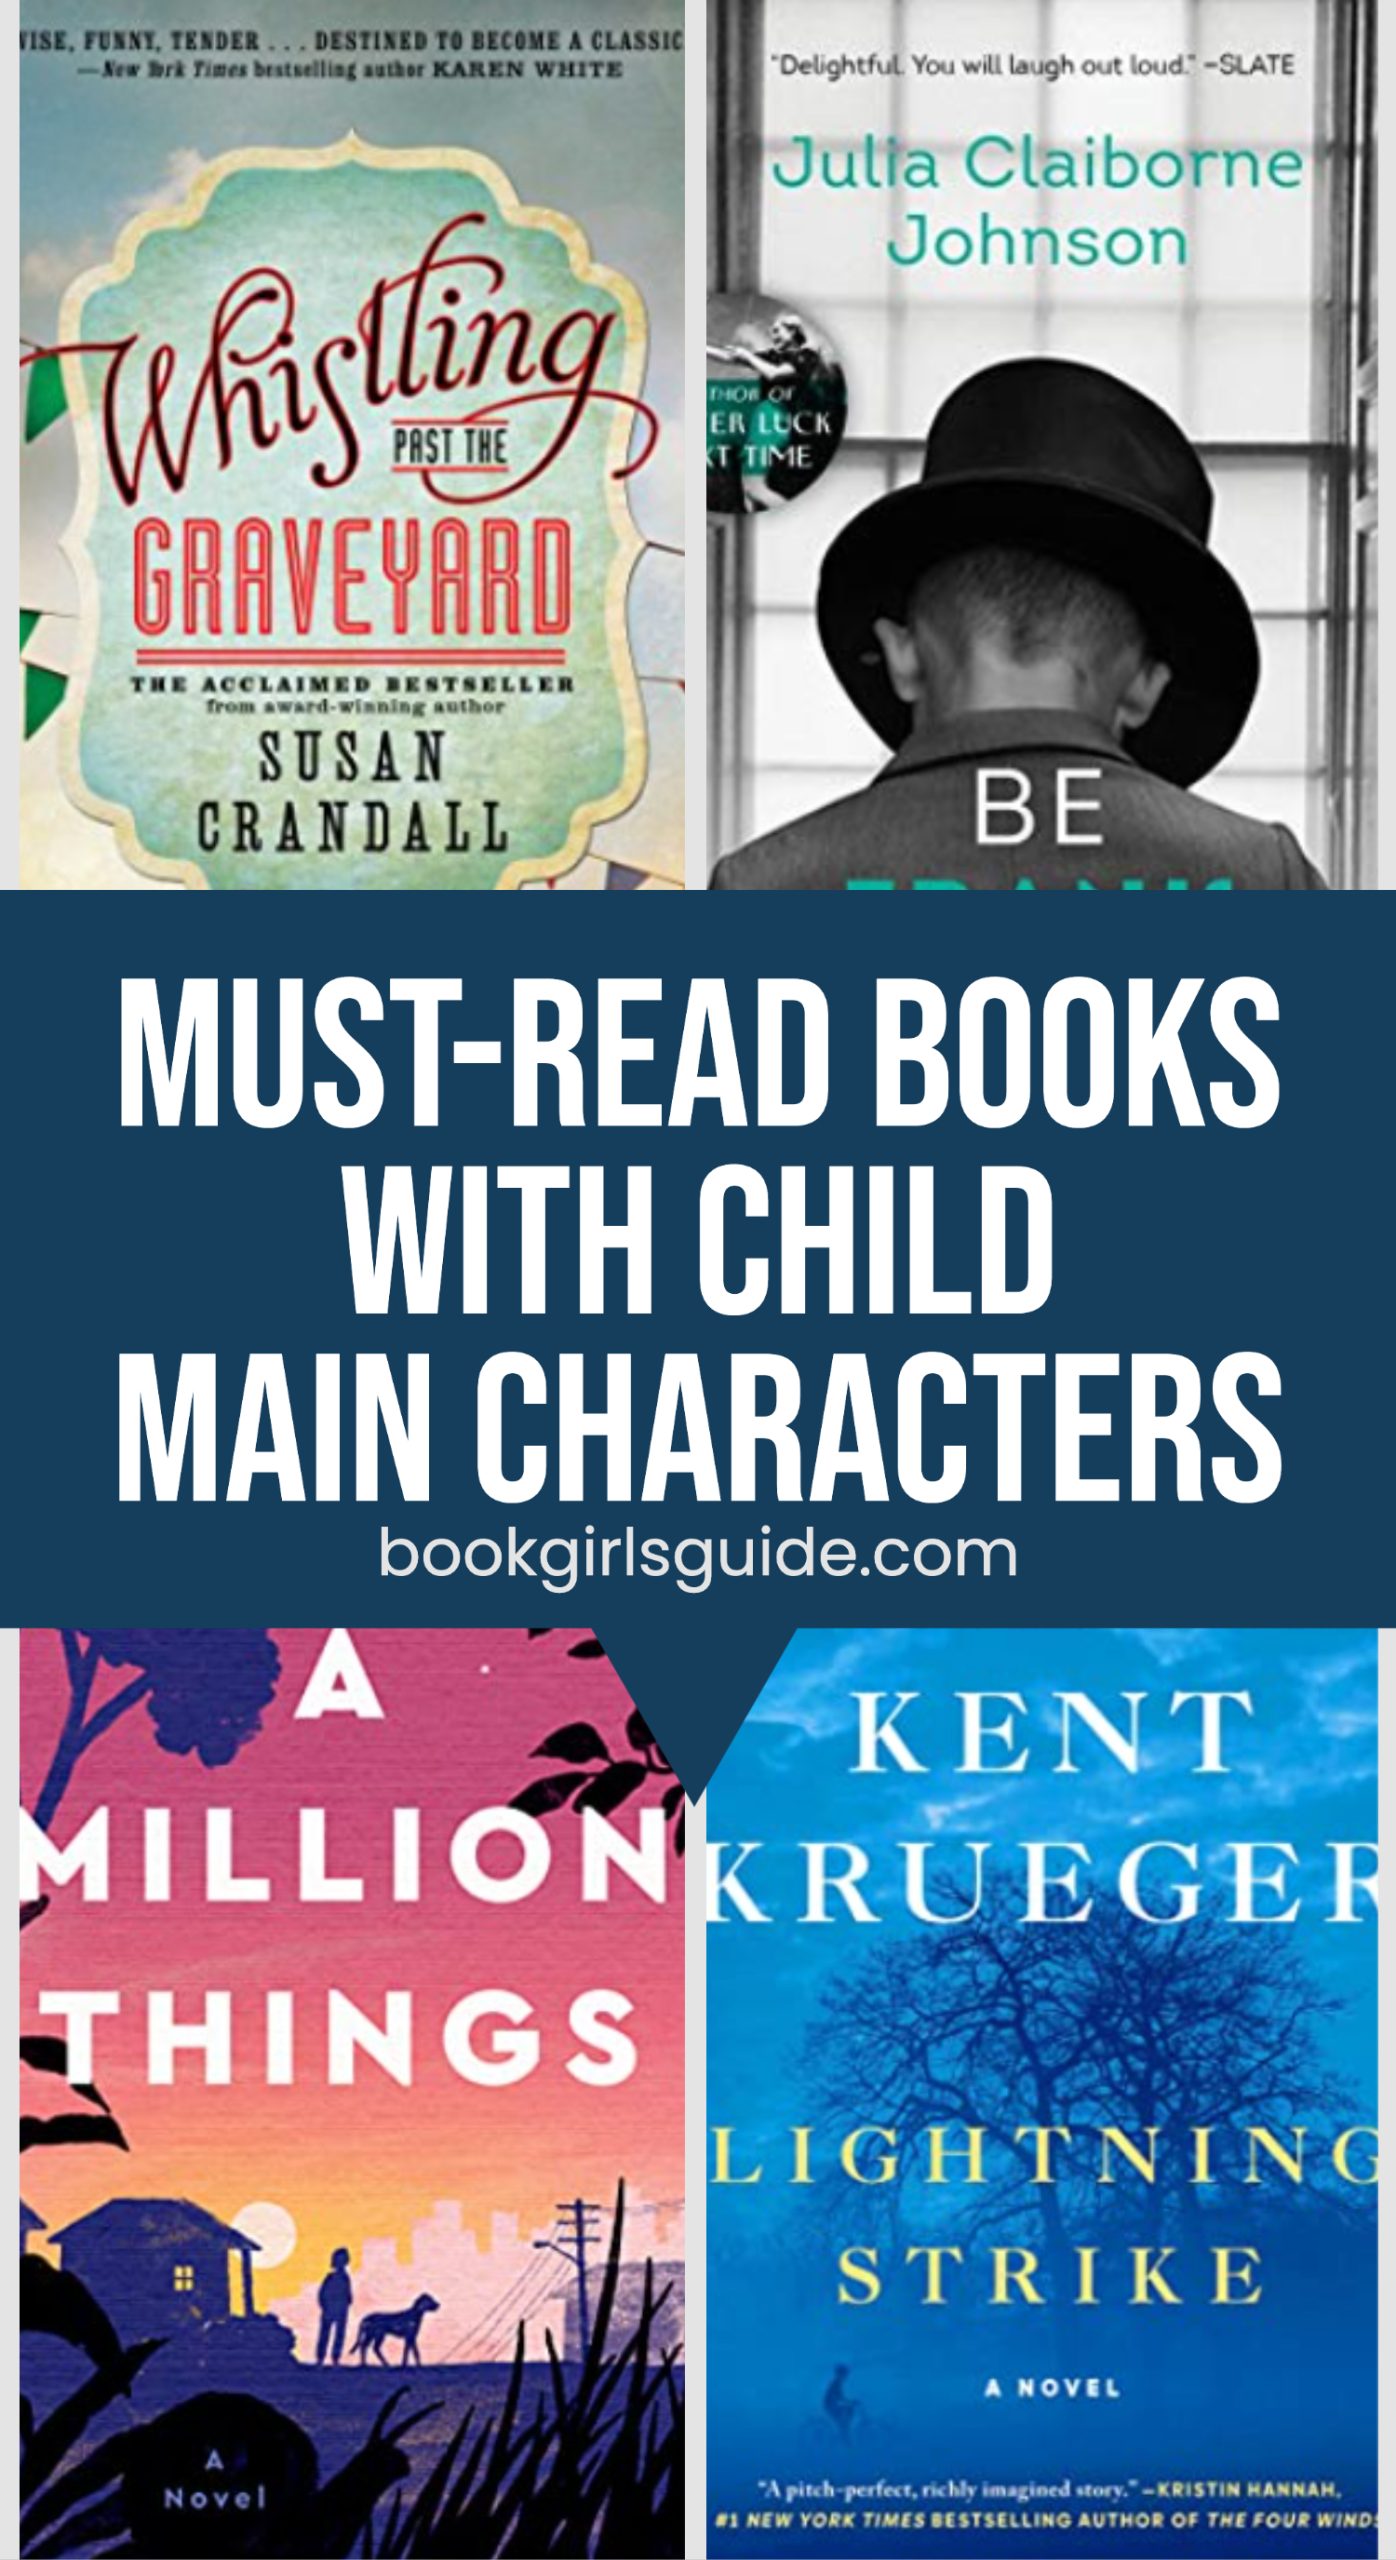 Four book covers with center text reading "must-read books with child main characters"